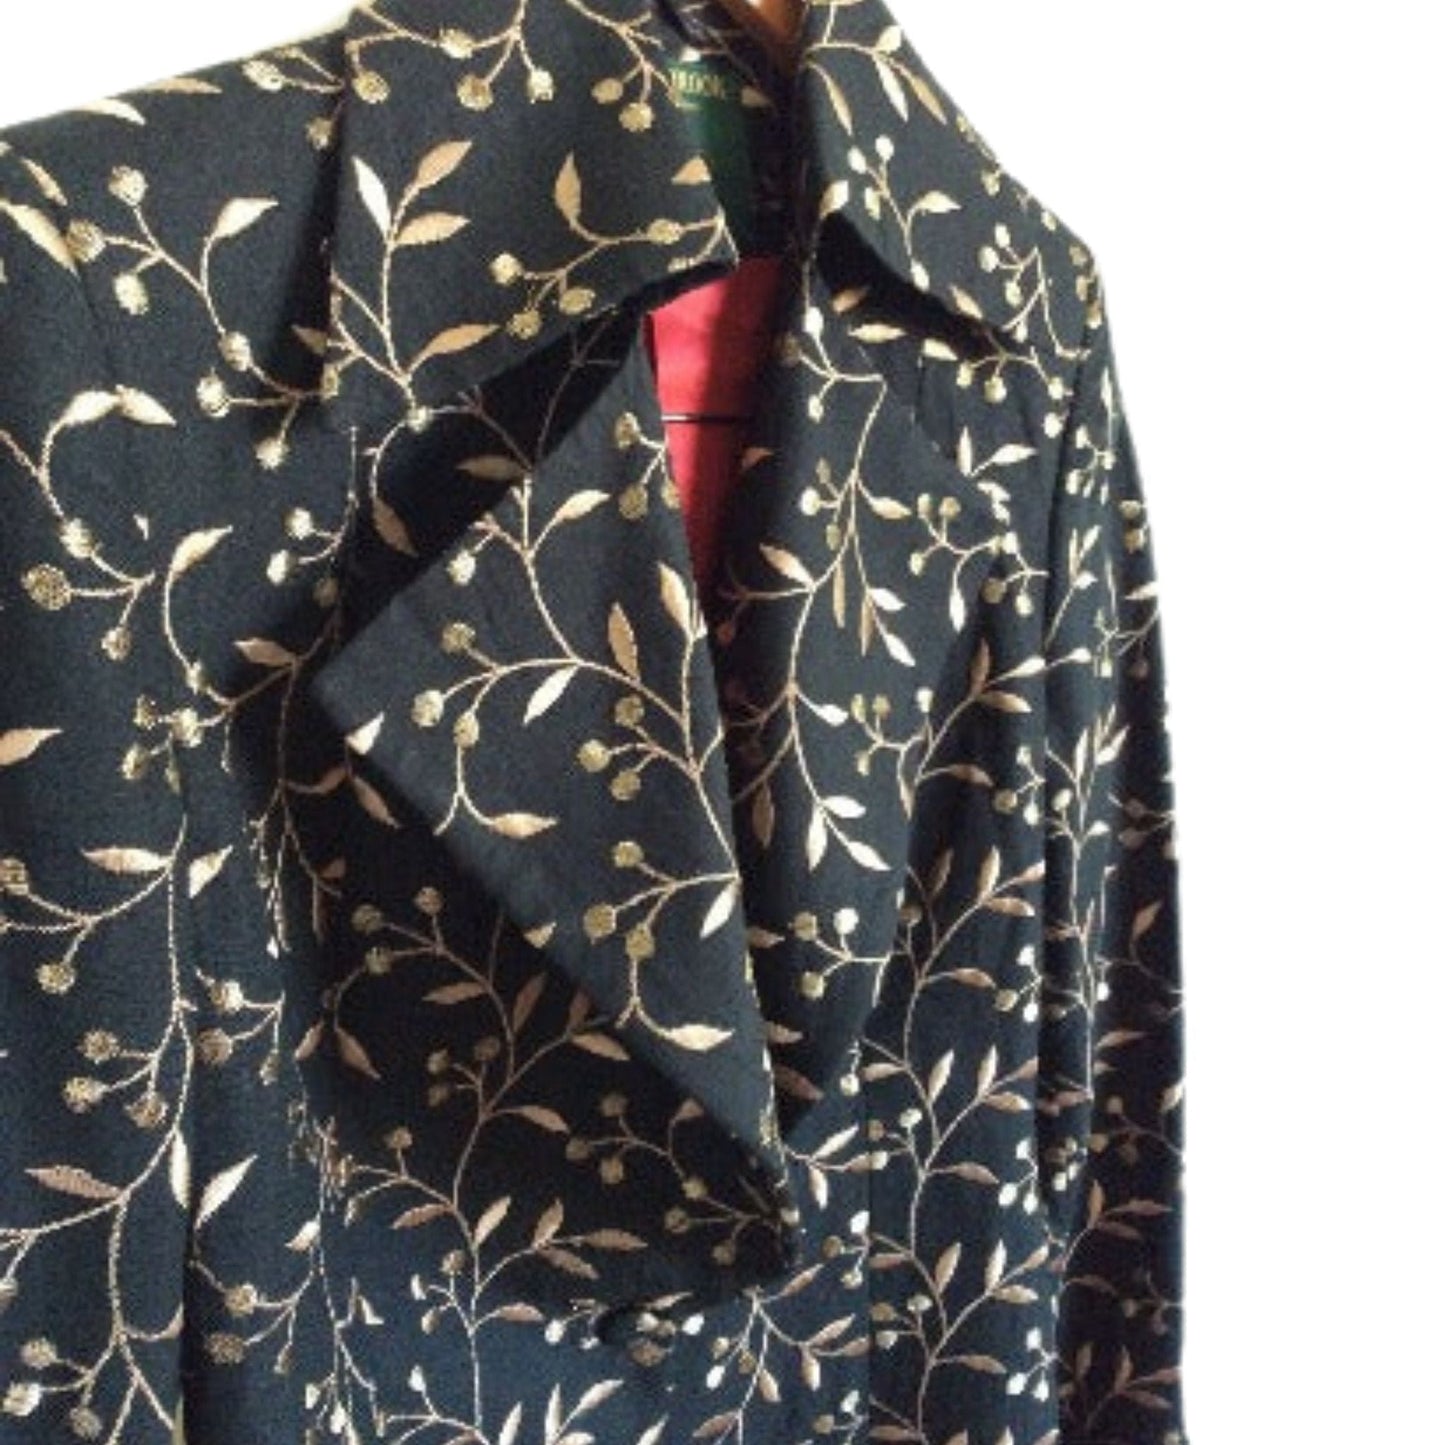 Embroidered Silk Coat Small / Black / Y2K - Now